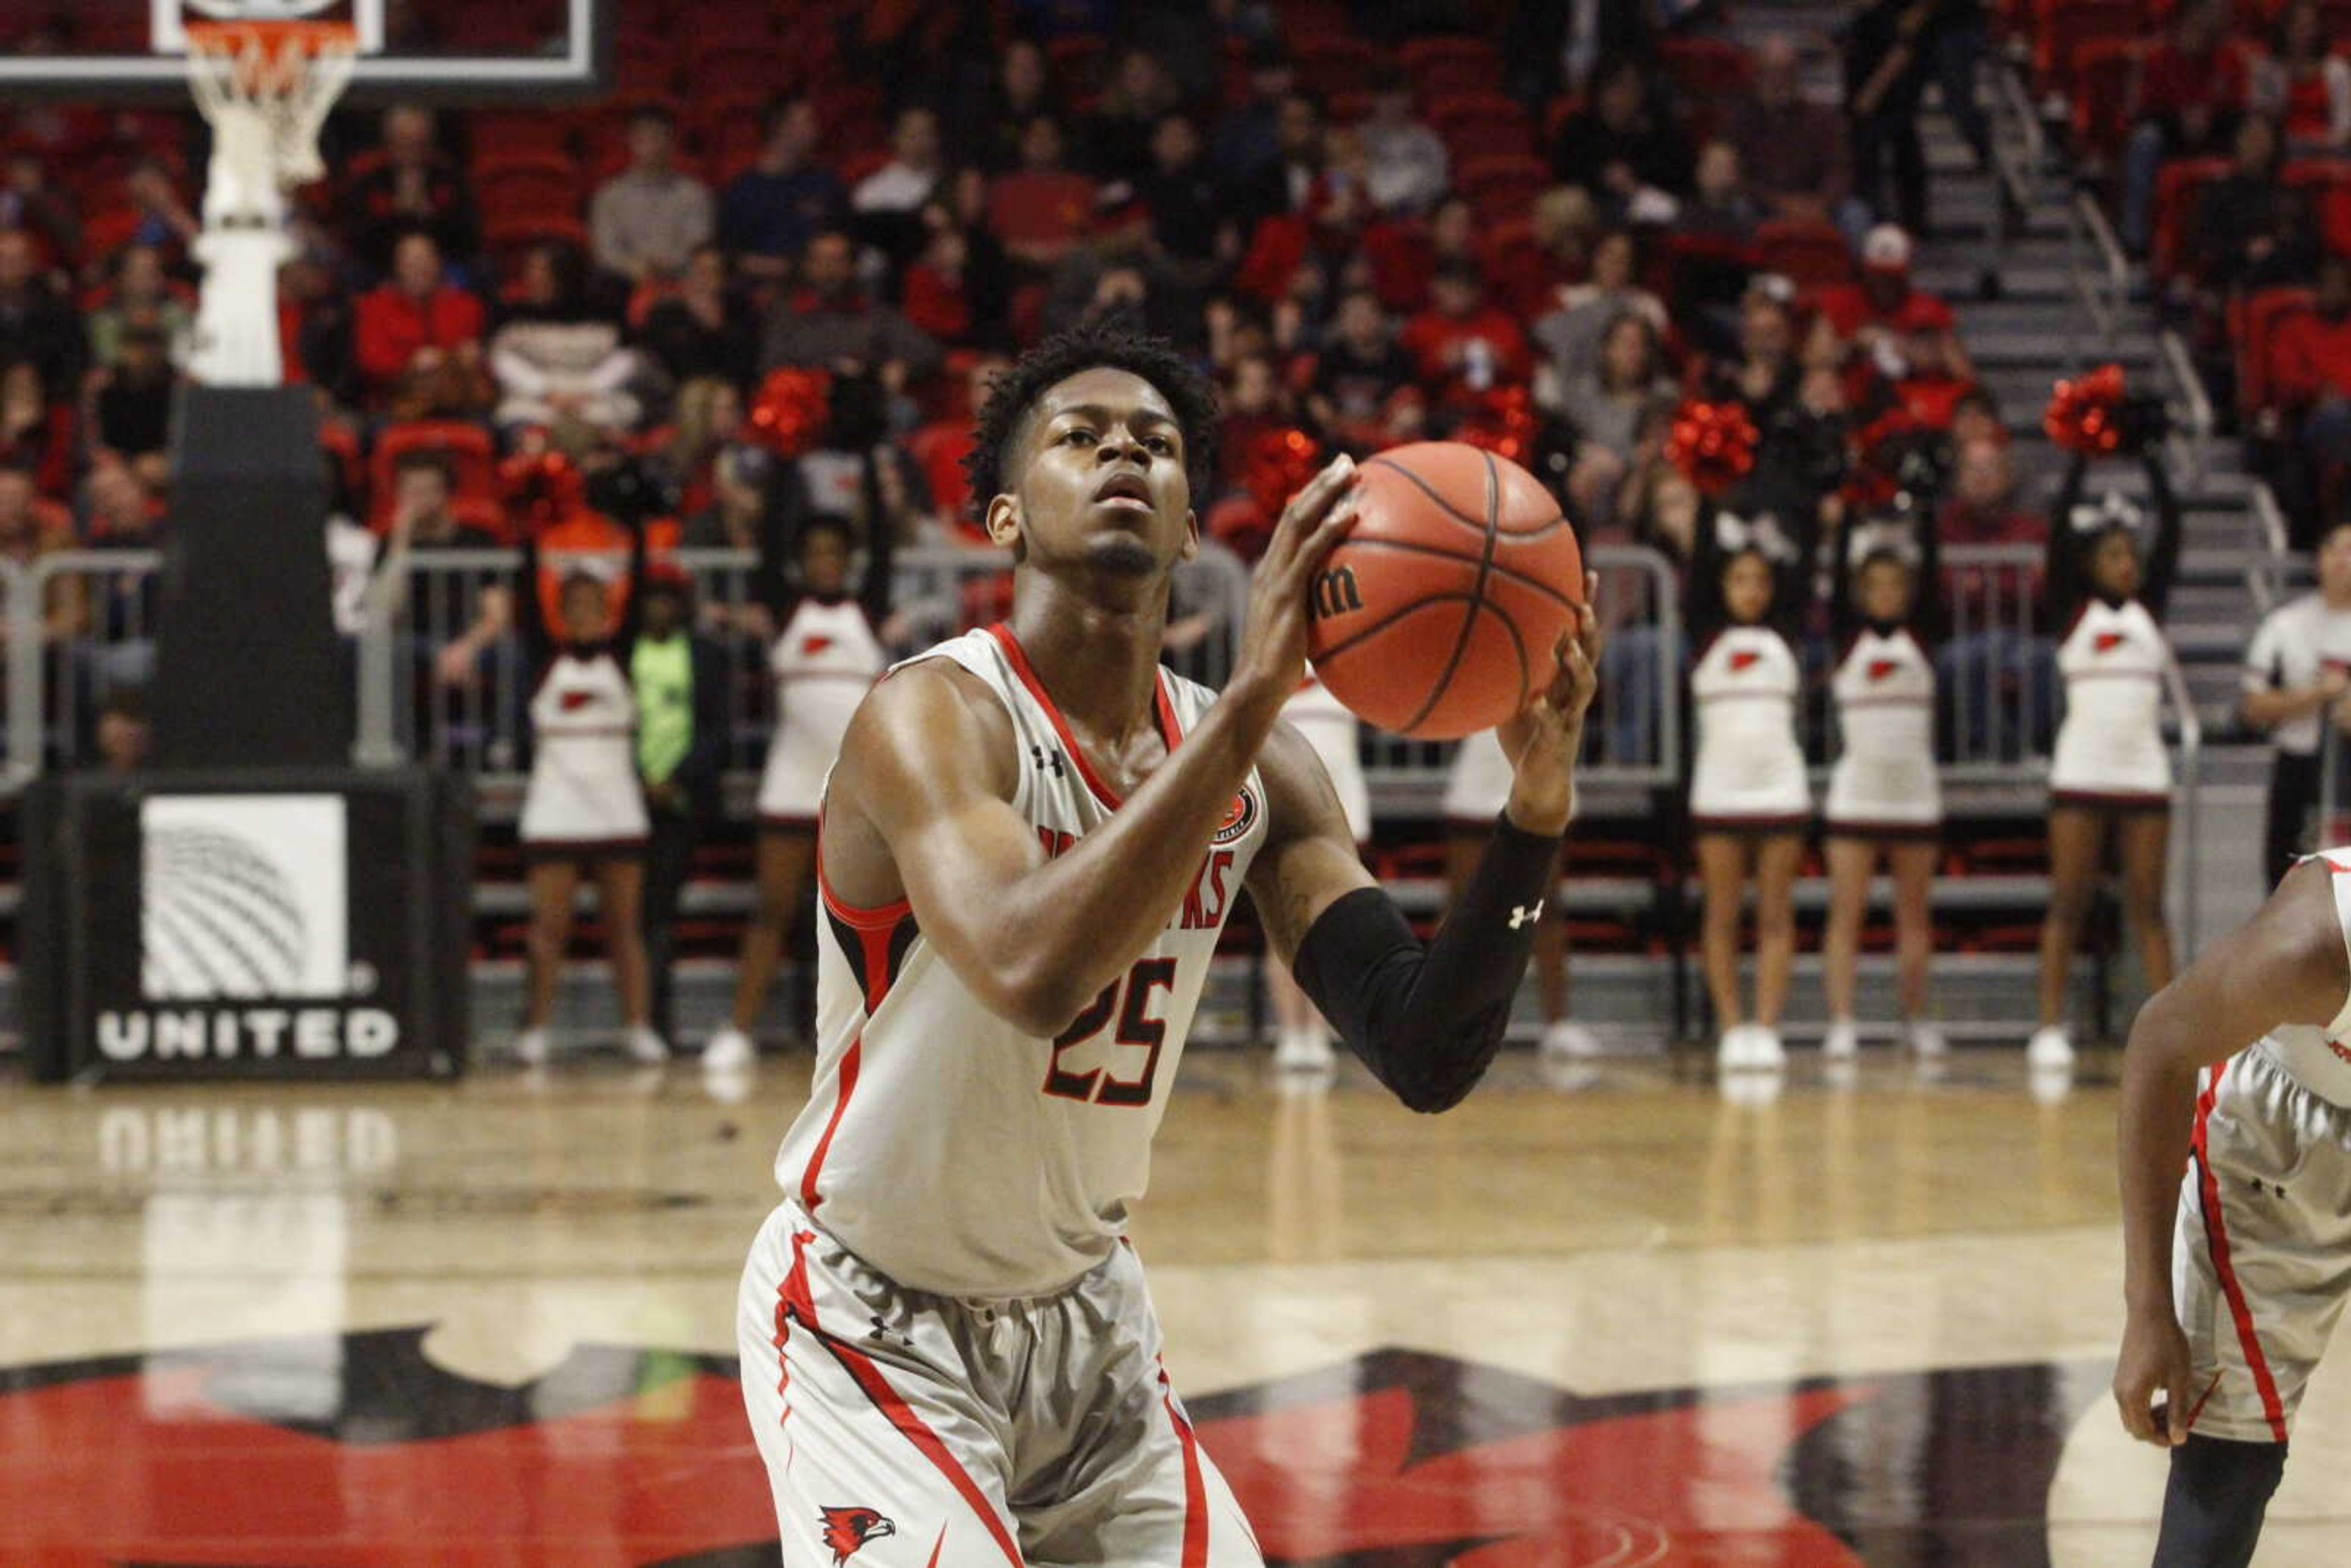 Sophomore guard Ledarrius Brewer shoots free throws in the second half of a 83-73 loss to SIU on Dec. 8.